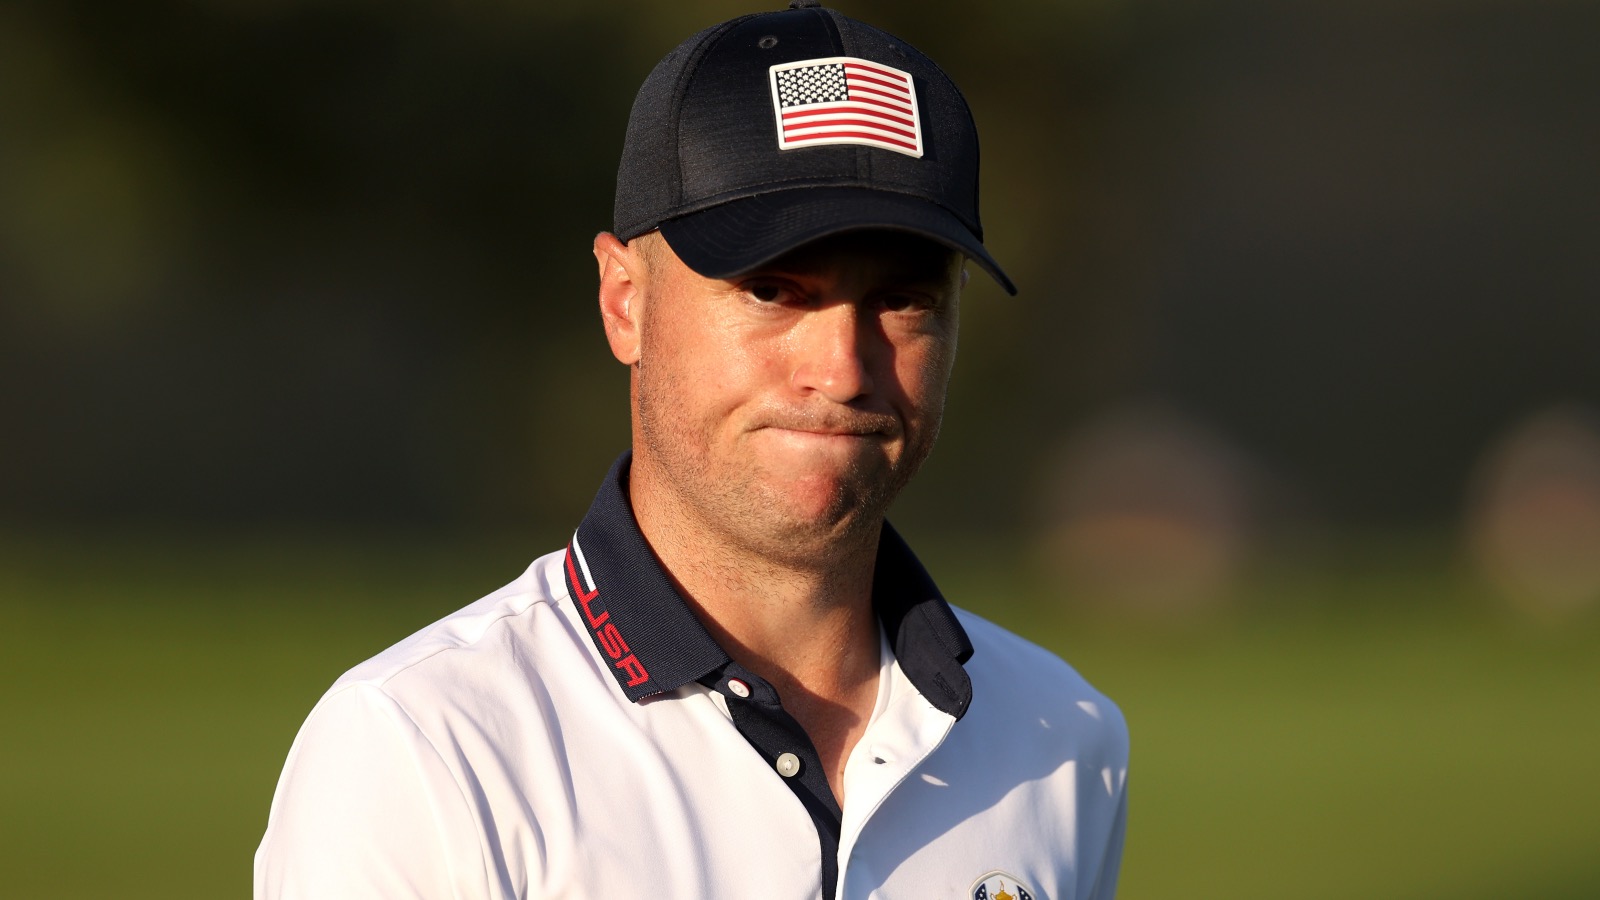 Justin Thomas staring at the camera during the Ryder Cup